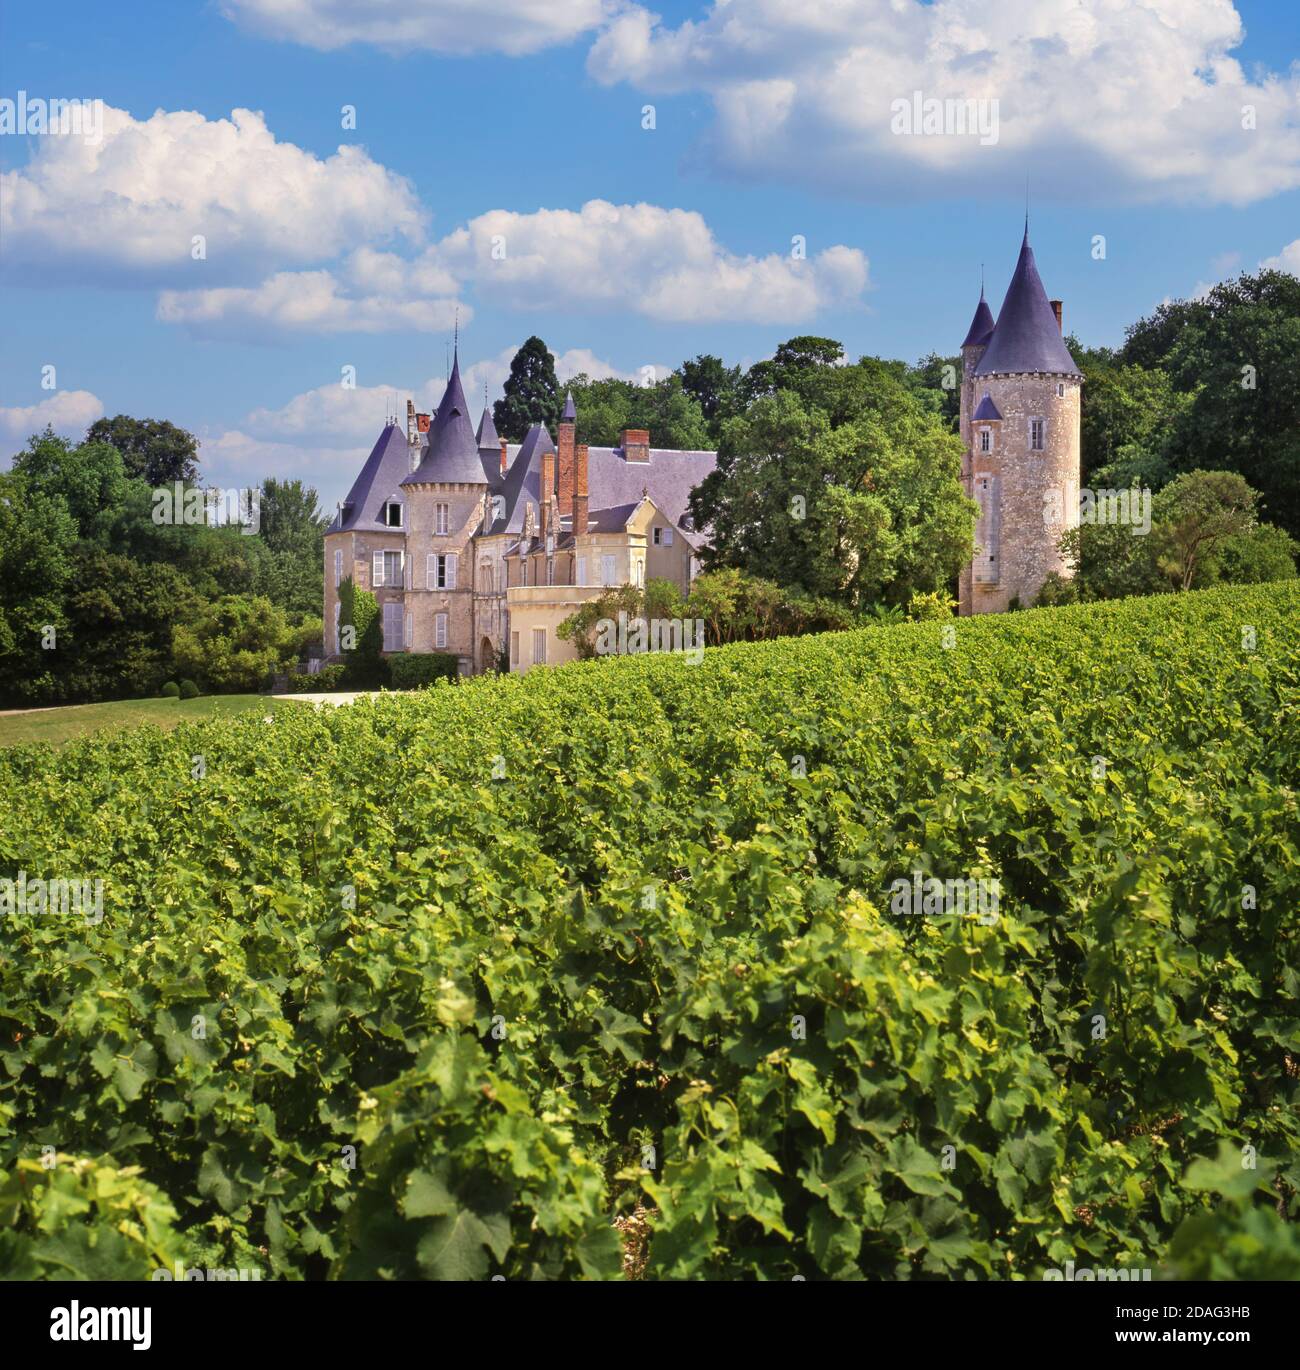 Château de Tracy, with Sauvignon Blanc vineyards in foreground Tracy-sur-Loire, Pouilly-Fumé, Nièvre, France. Stock Photo